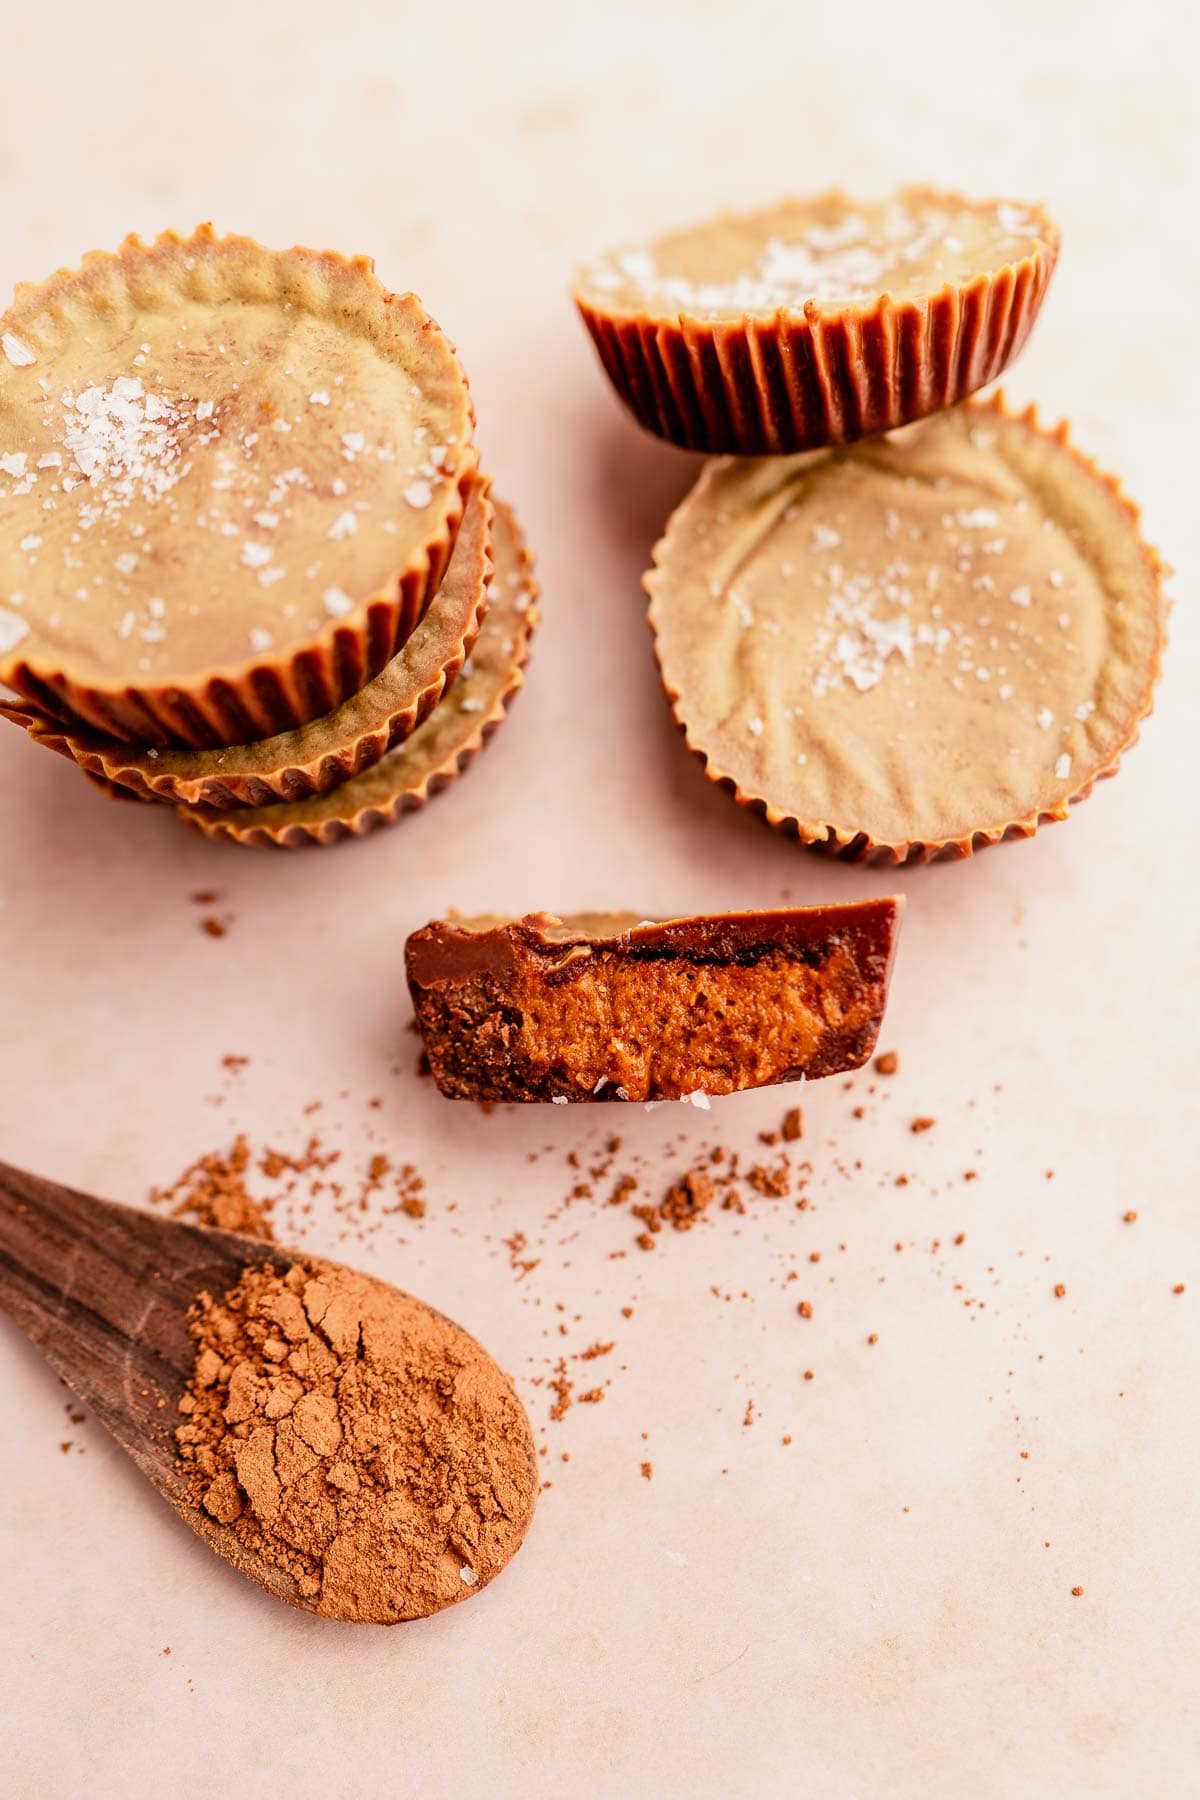 Chocolate almond butter cups with a spoon next to them.